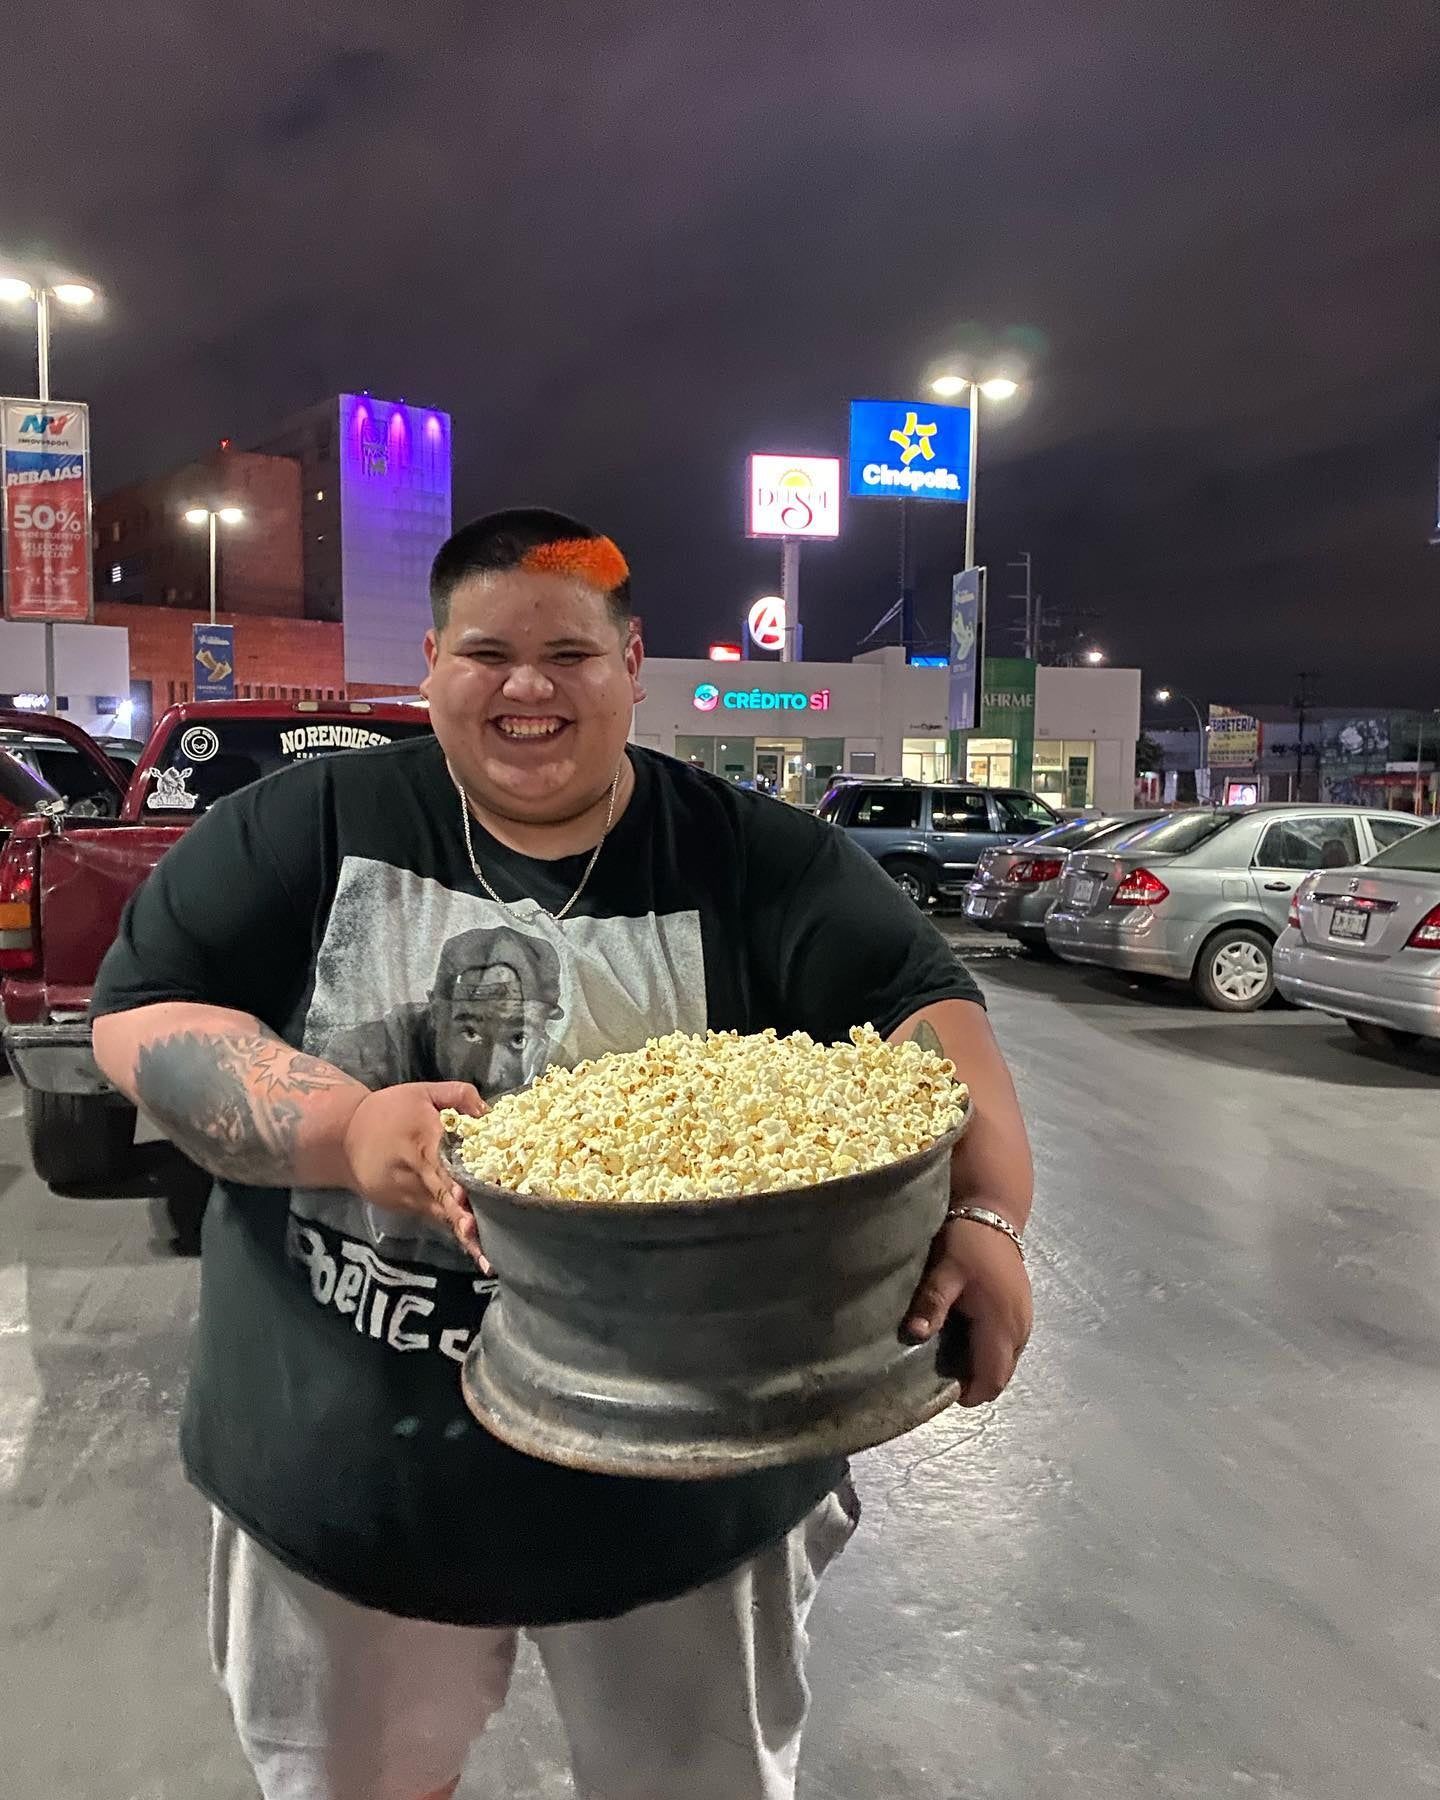 Fast and furious 9 pop corn combo